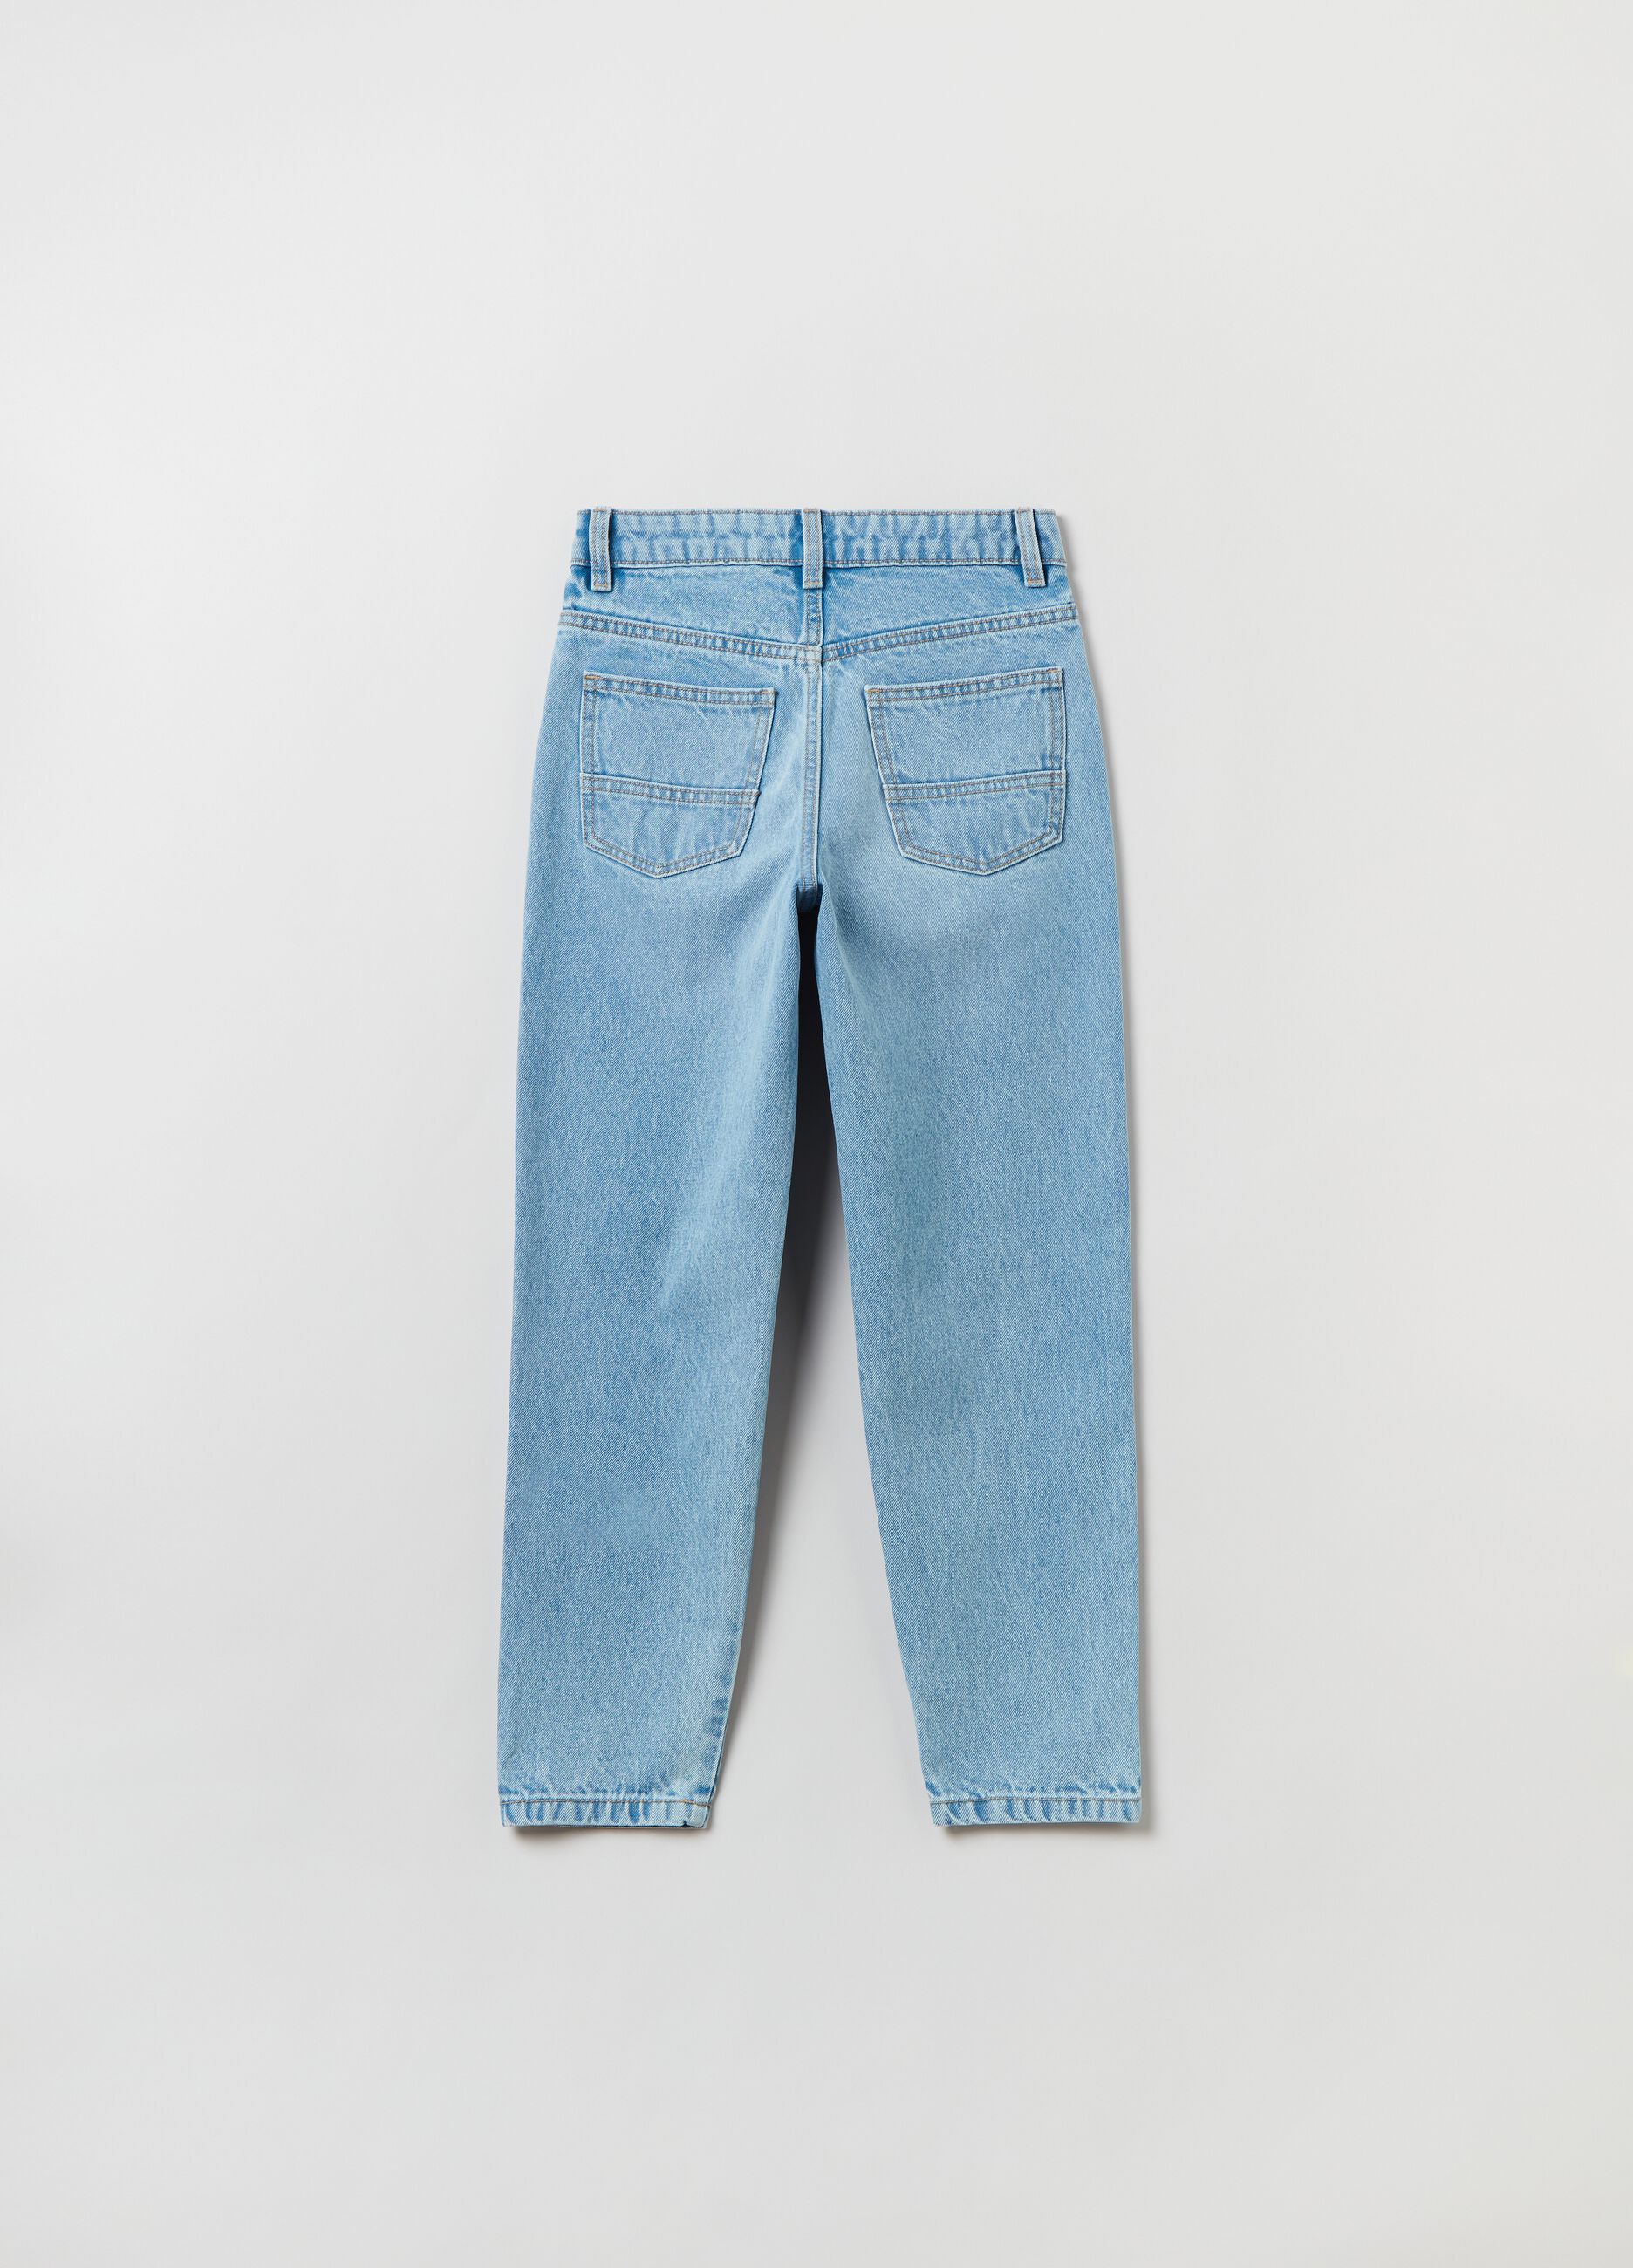 Mum-fit jeans with abrasions_1